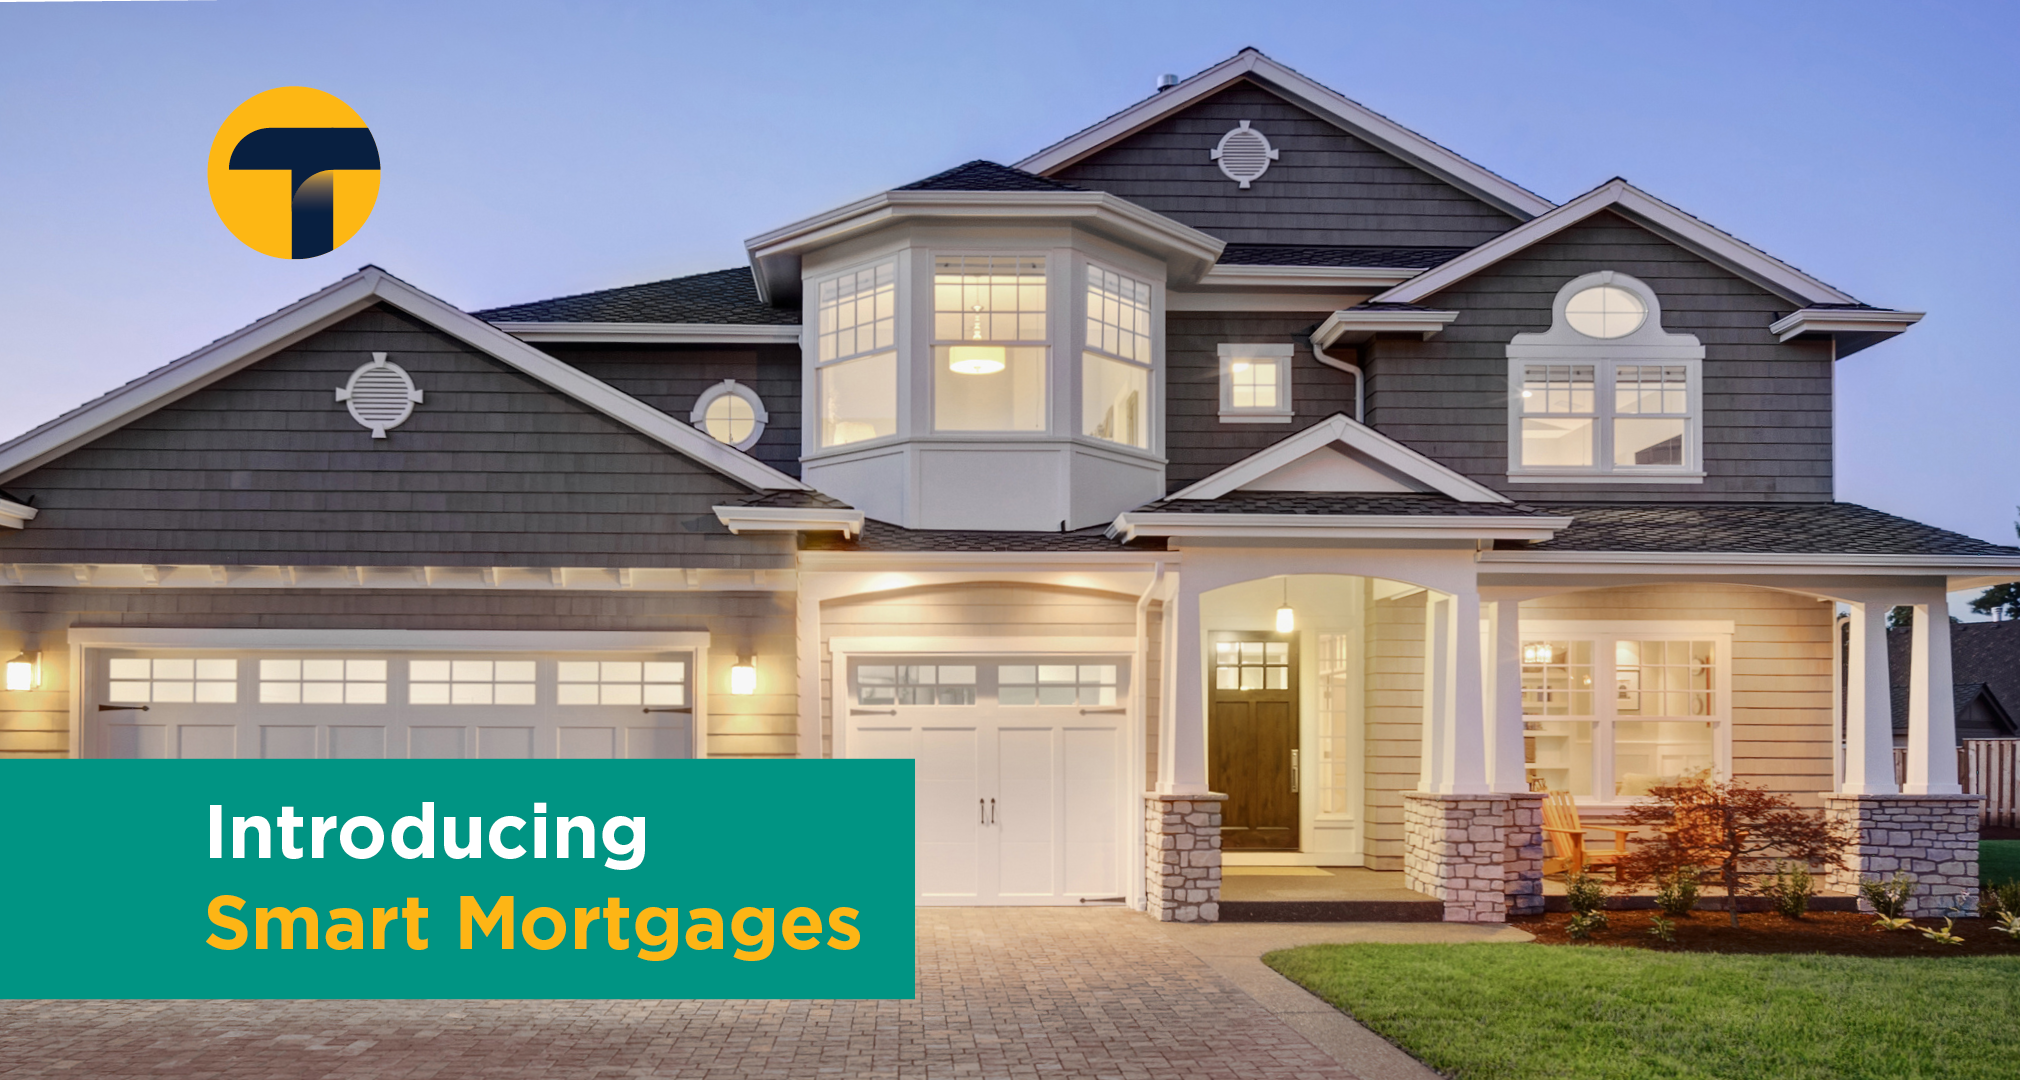 Introducing Smart Mortgages